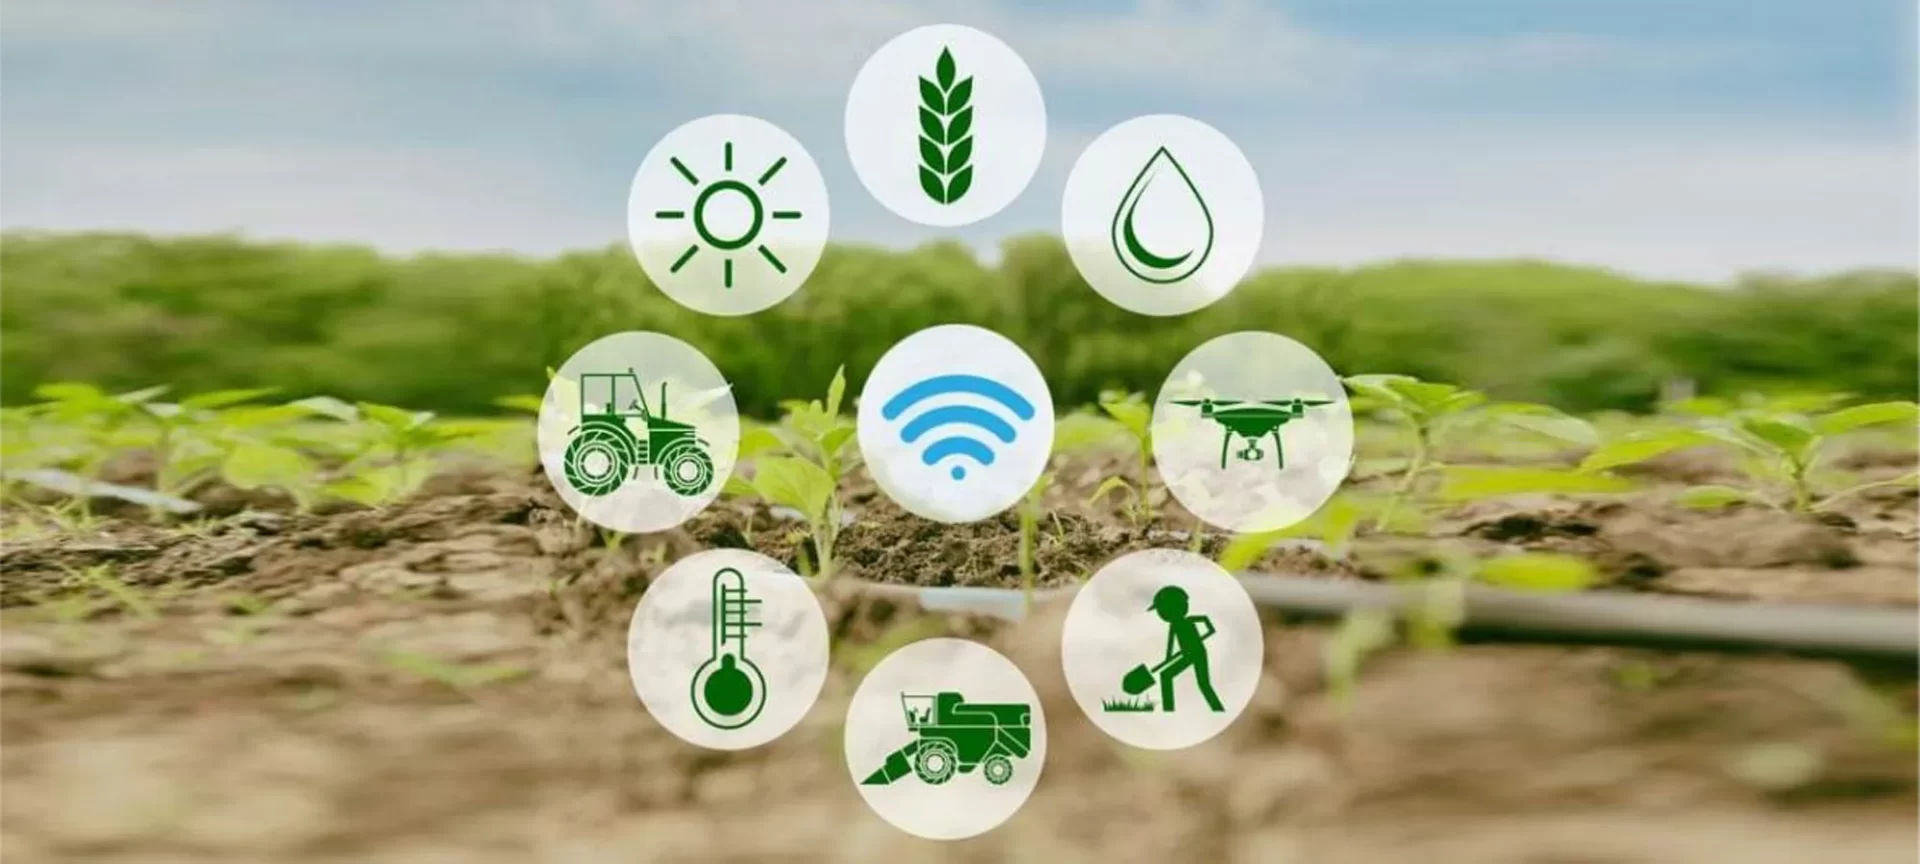 IoT Based Smart Agriculture System